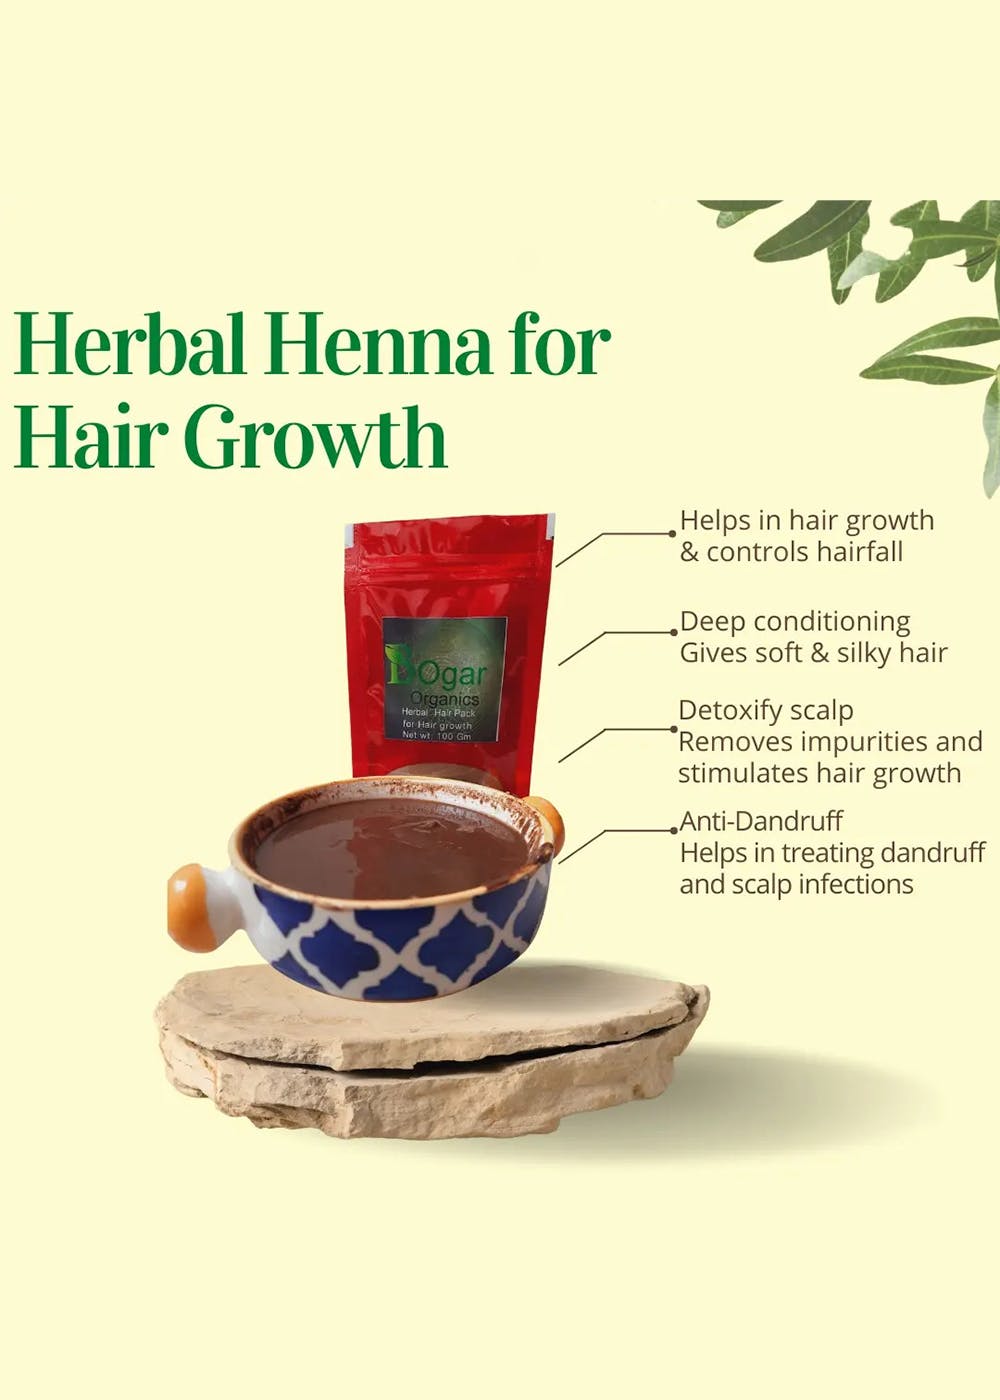 Get Herbal Henna Hair Pack - For Hair Growth 100g at ₹ 300 | LBB Shop